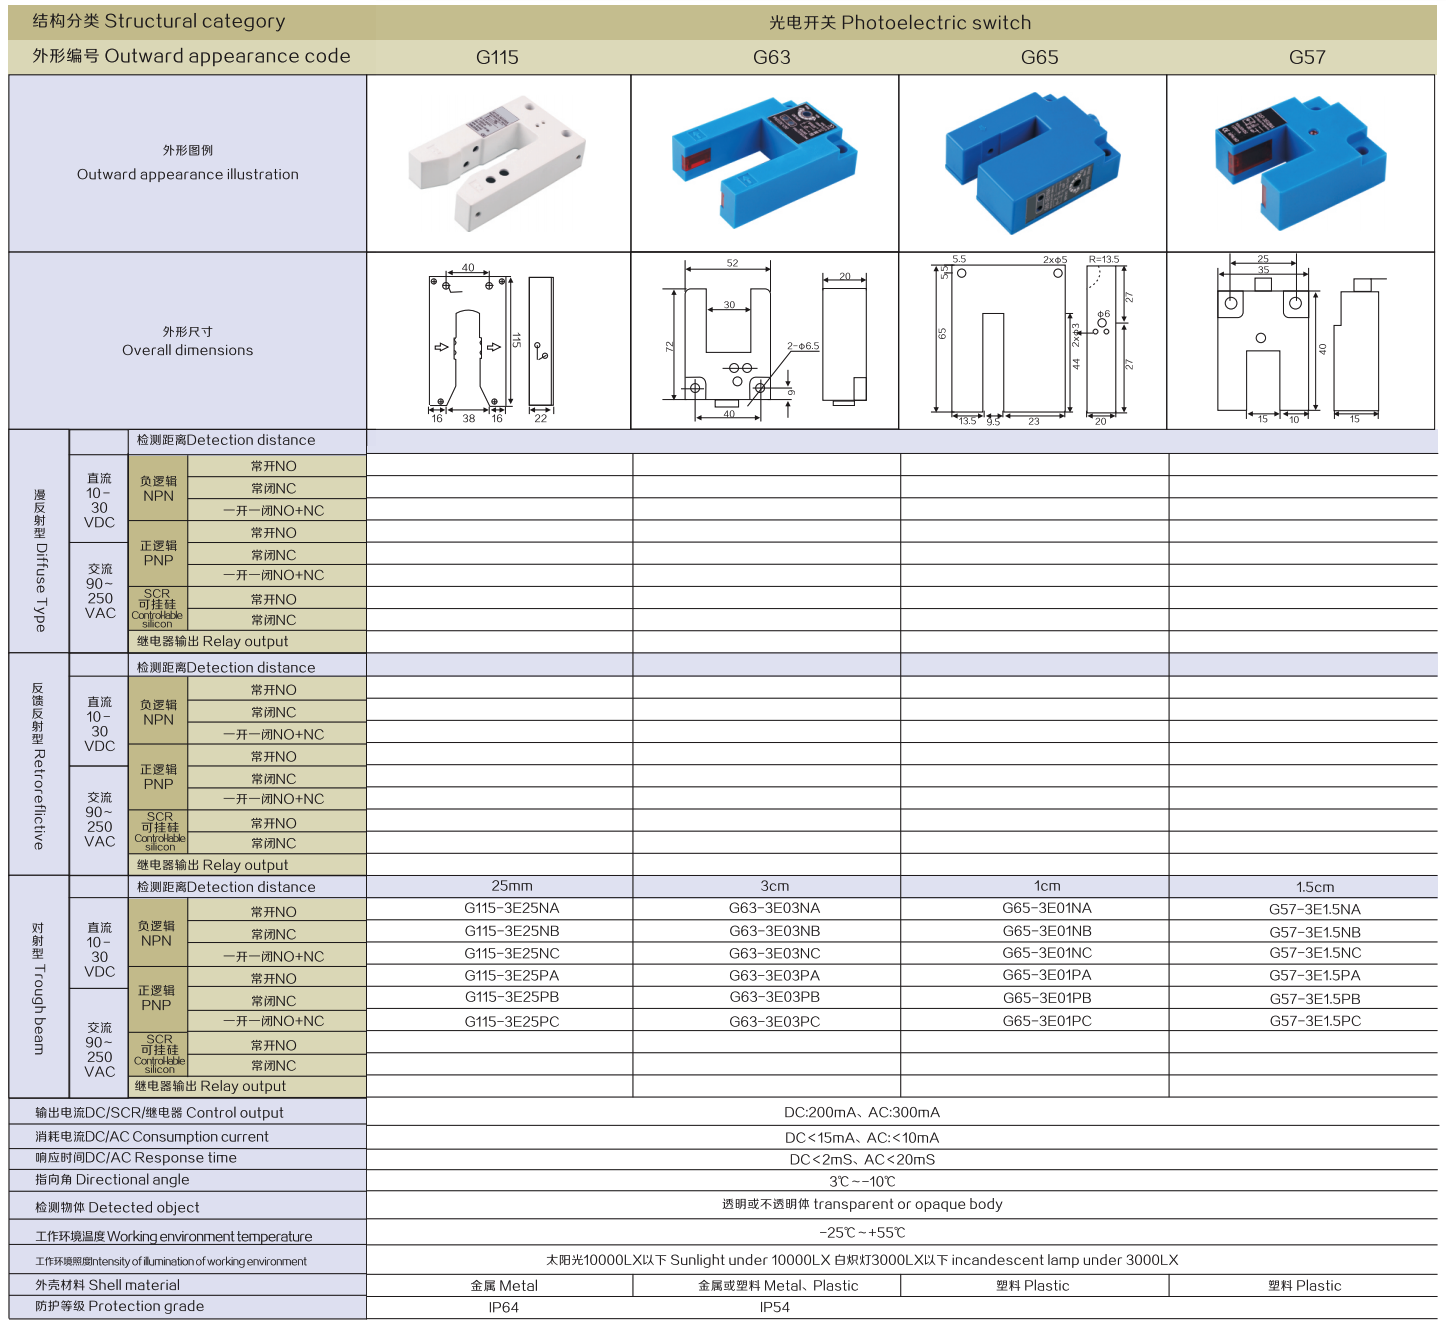 Structural category,Photoelectric switch,Outward appearance code